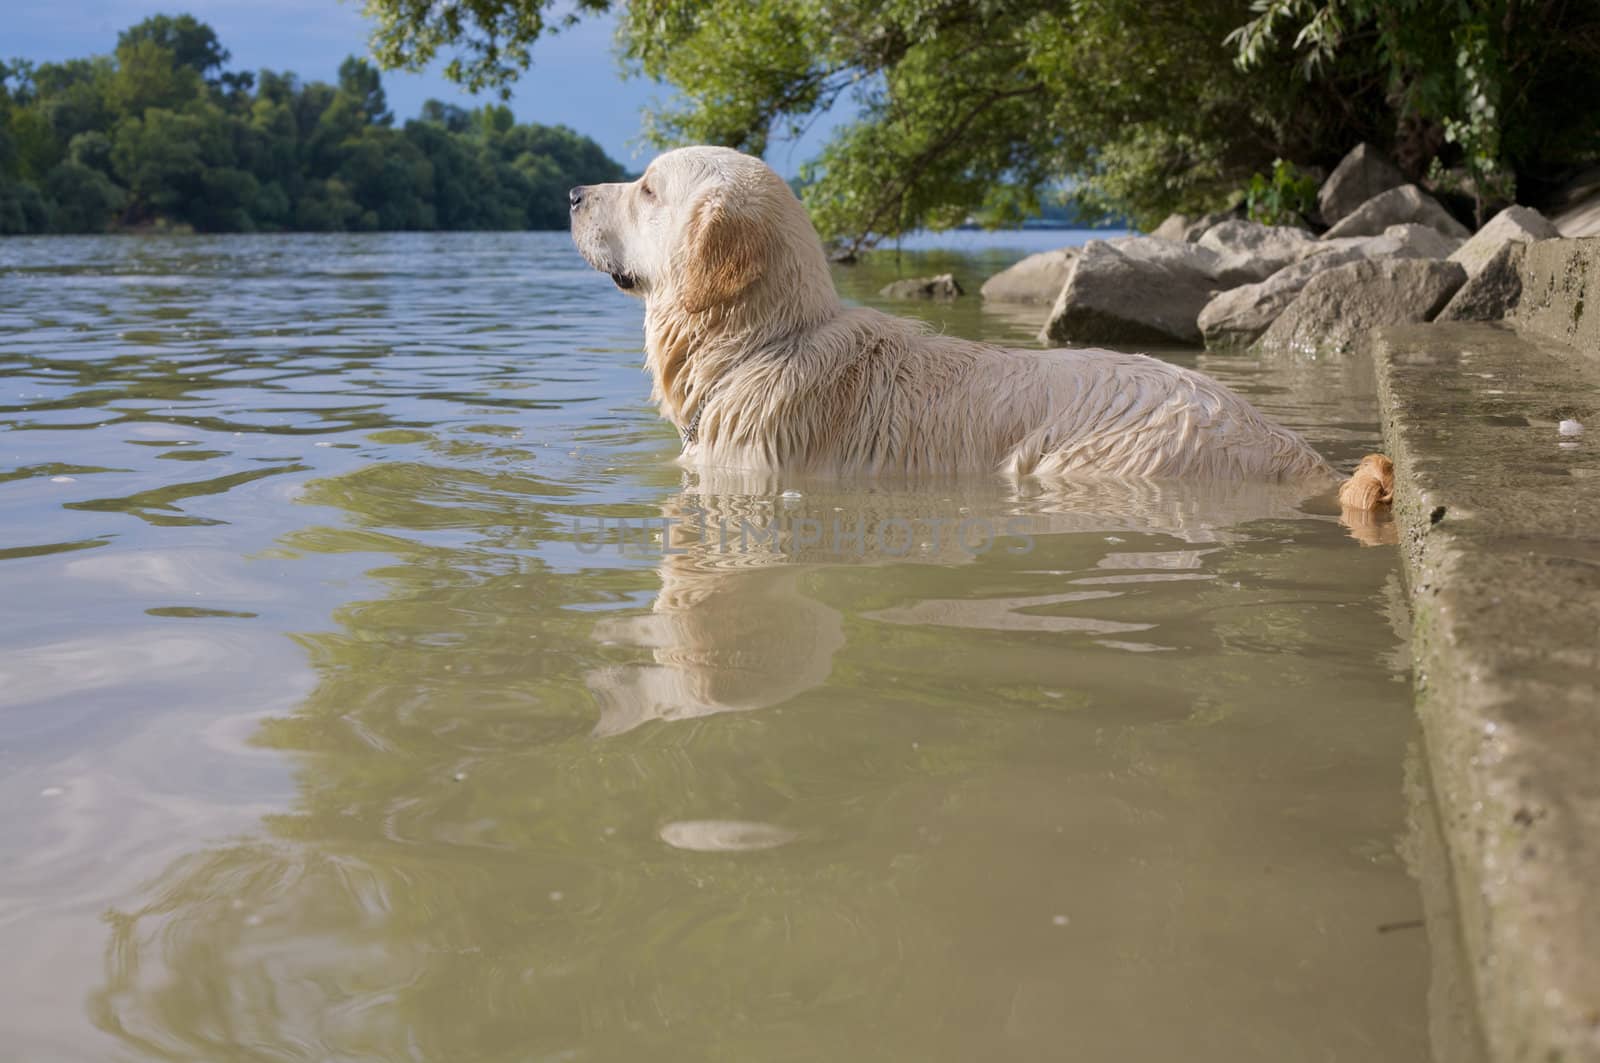 A young golden retriever in the Danube.